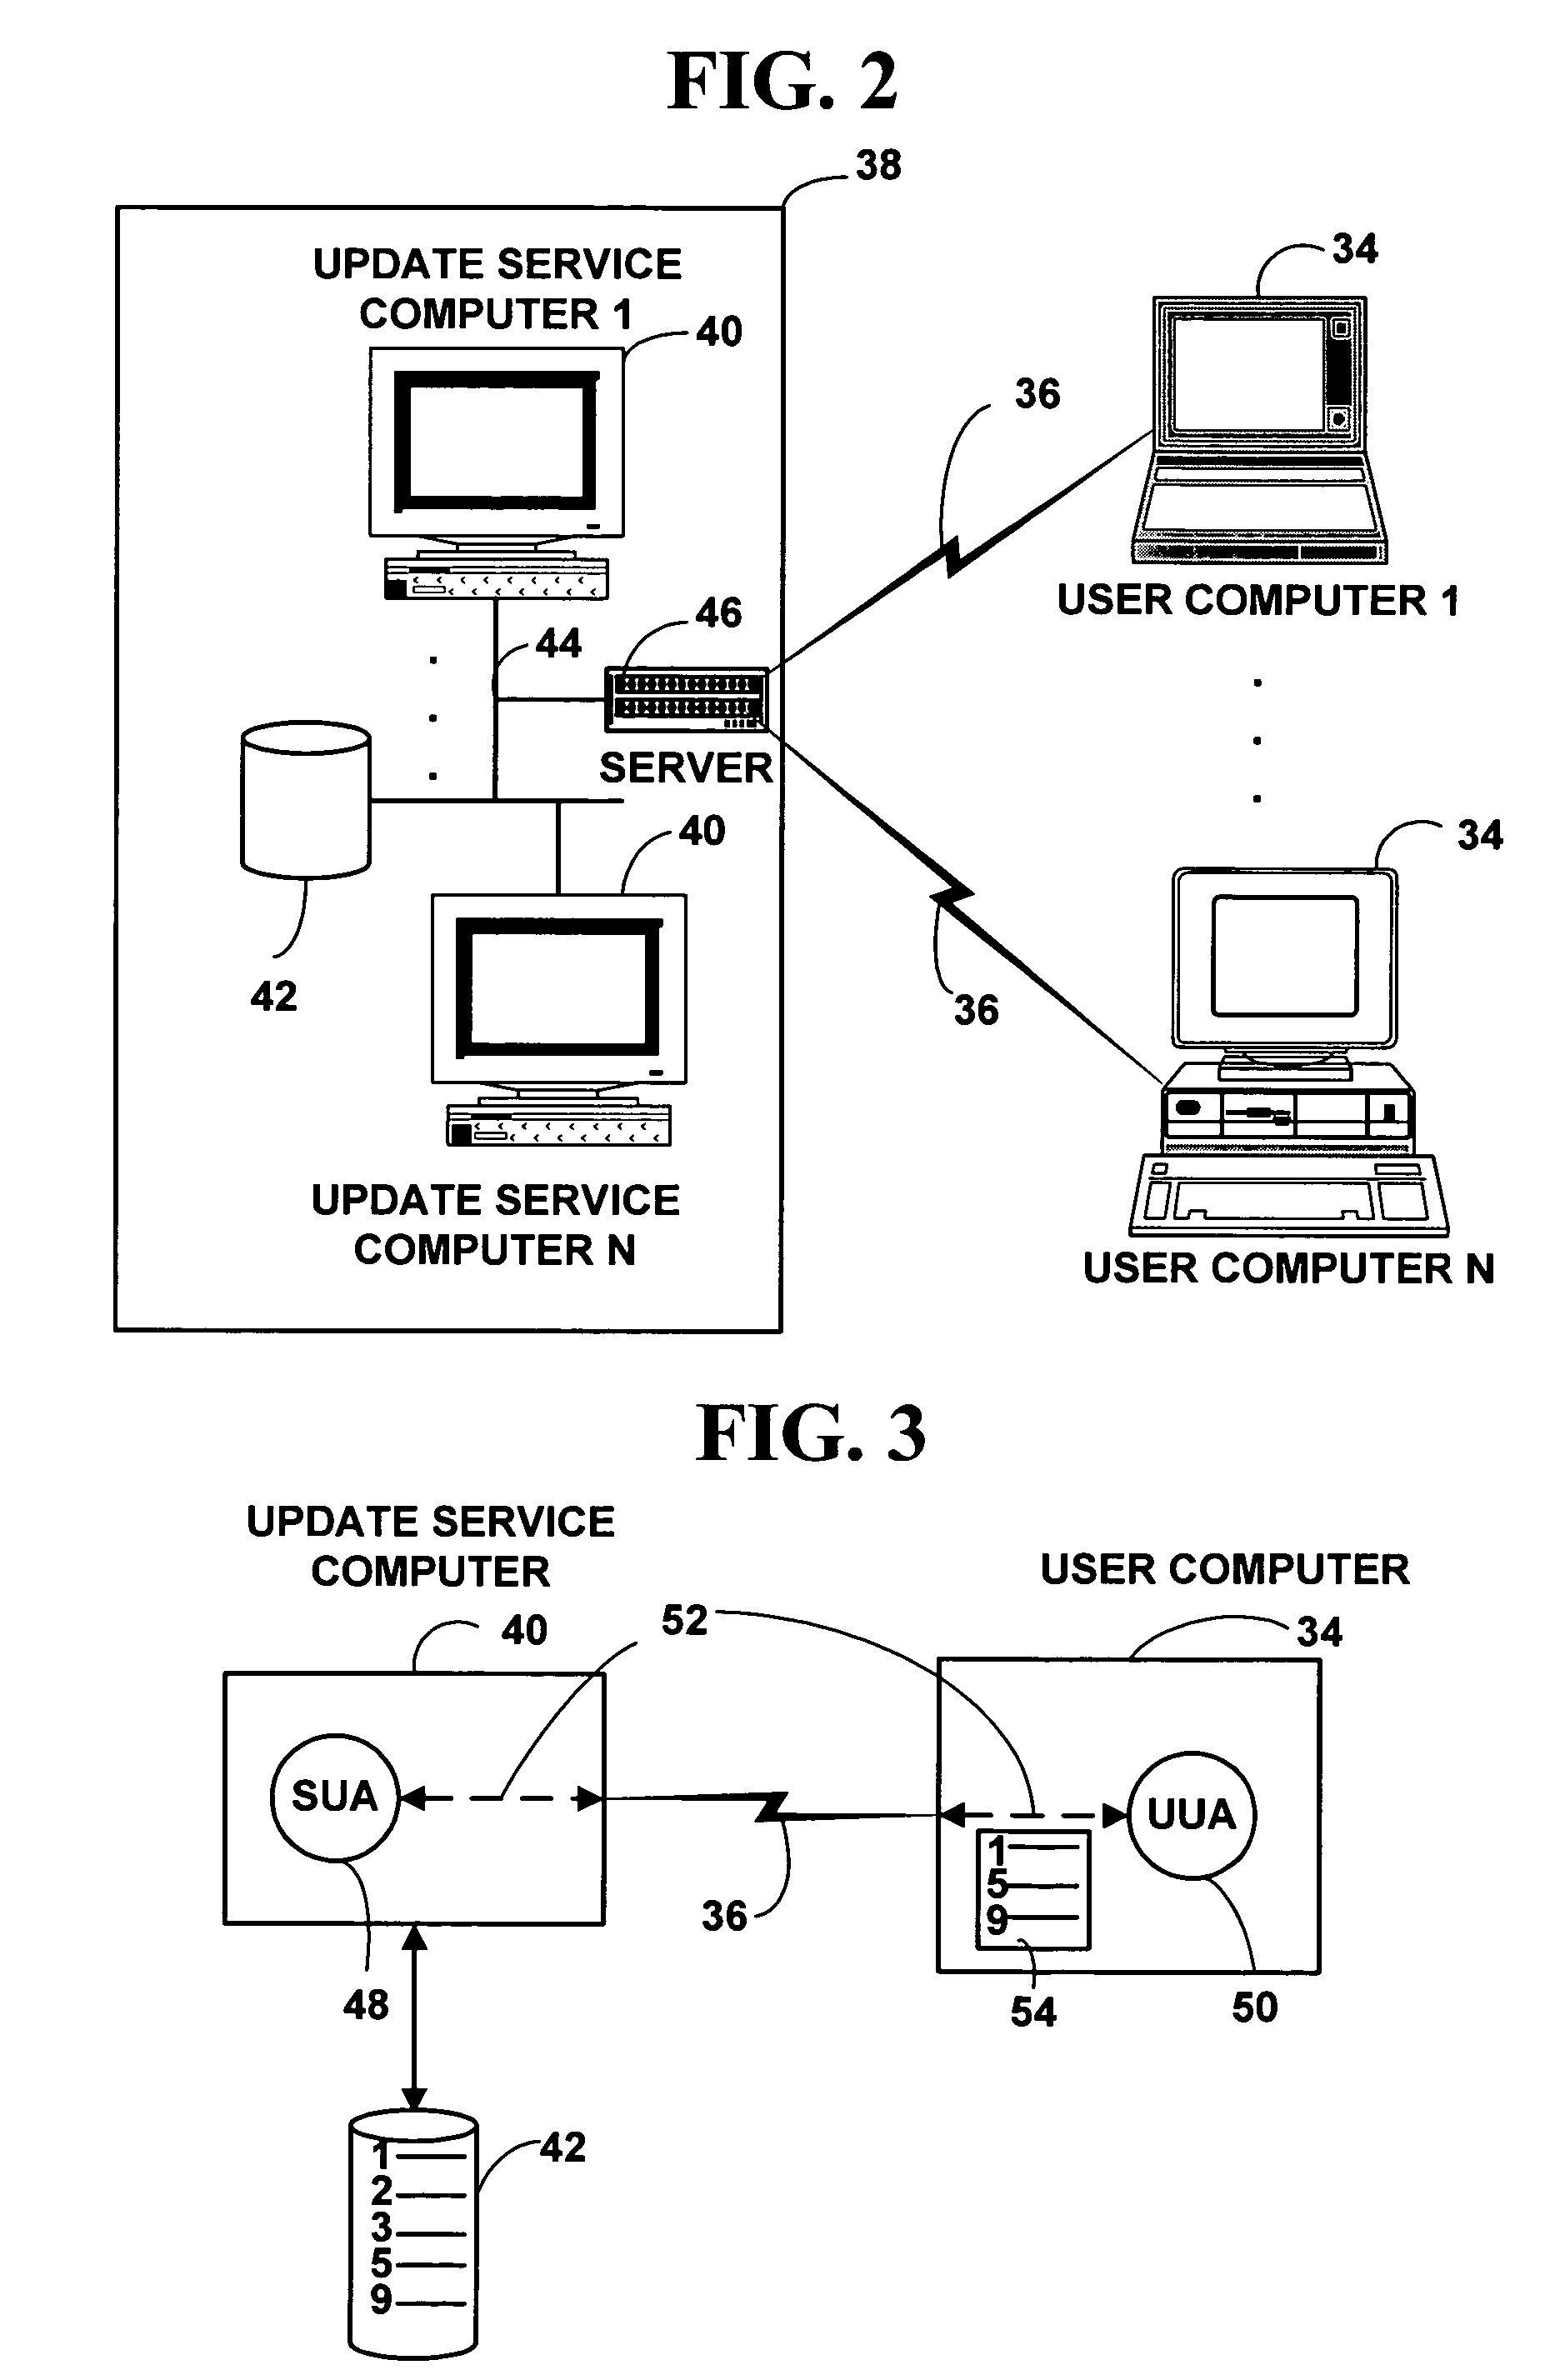 Method and system for identifying and obtaining computer software from a remote computer